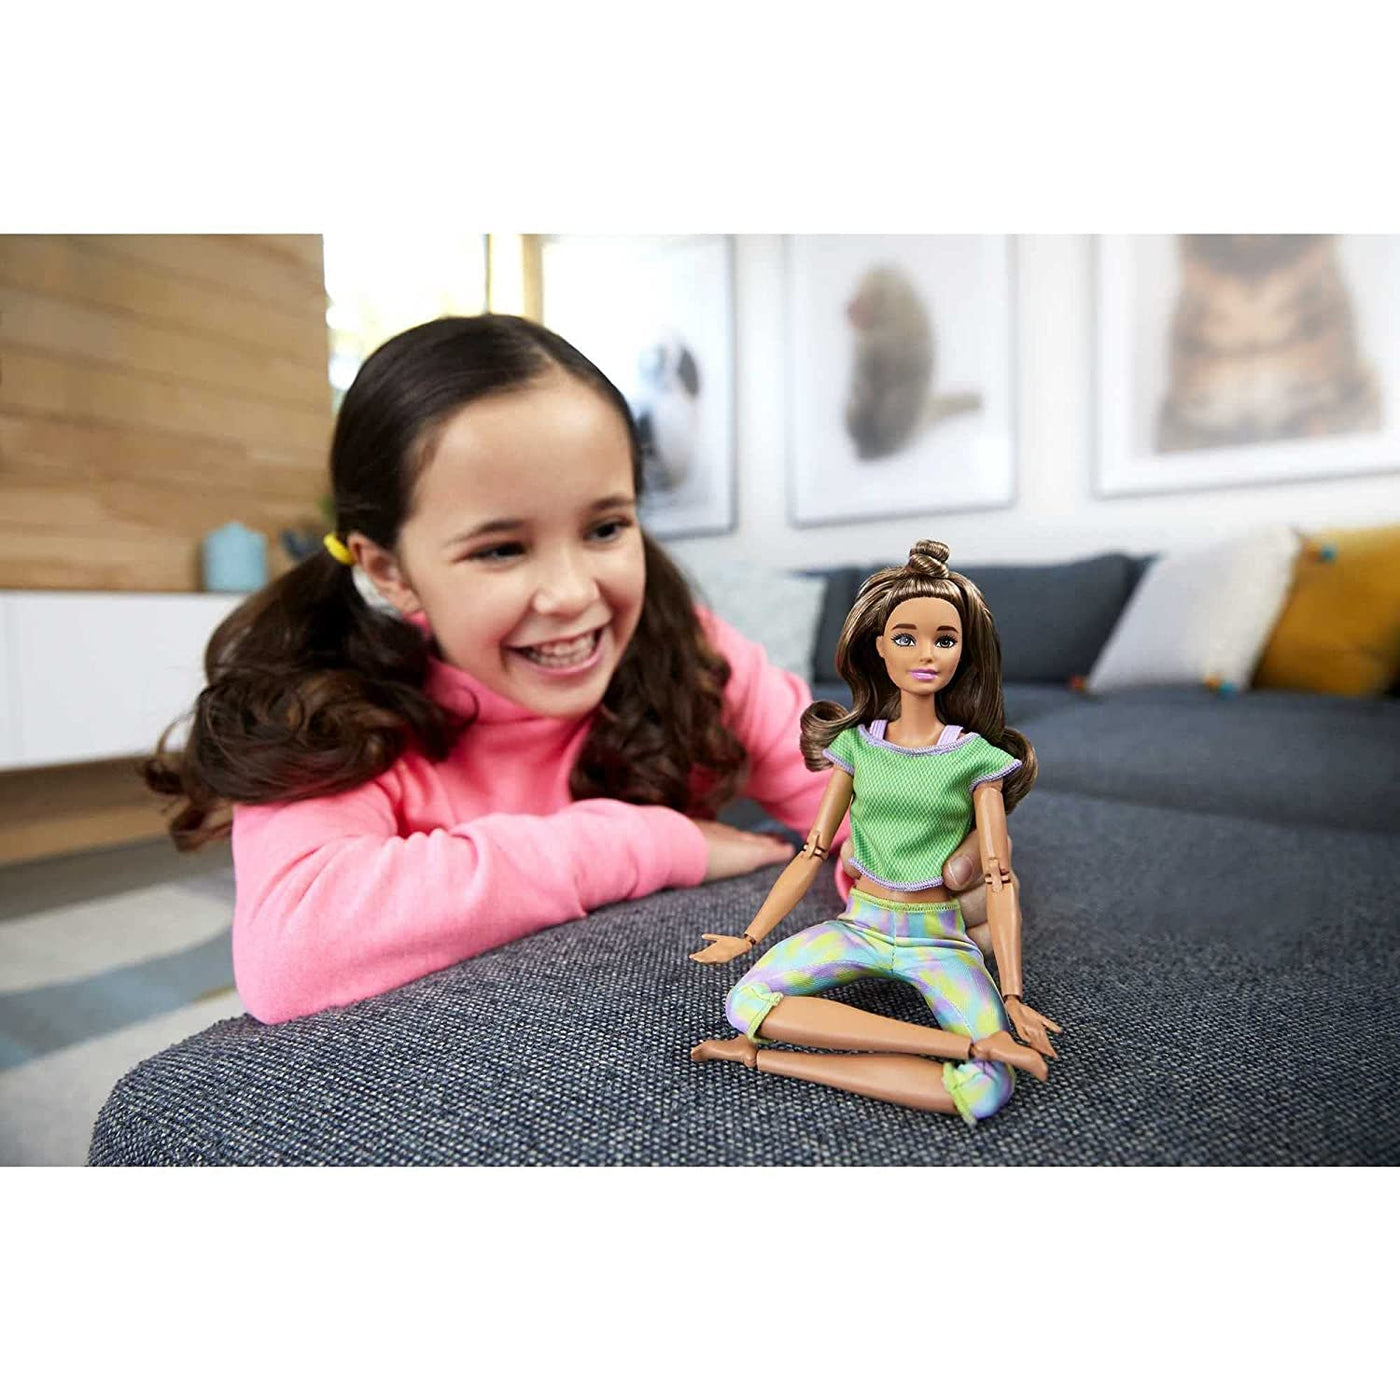 Barbie Made To Move Doll - 22 Flexible Joints | Barbie